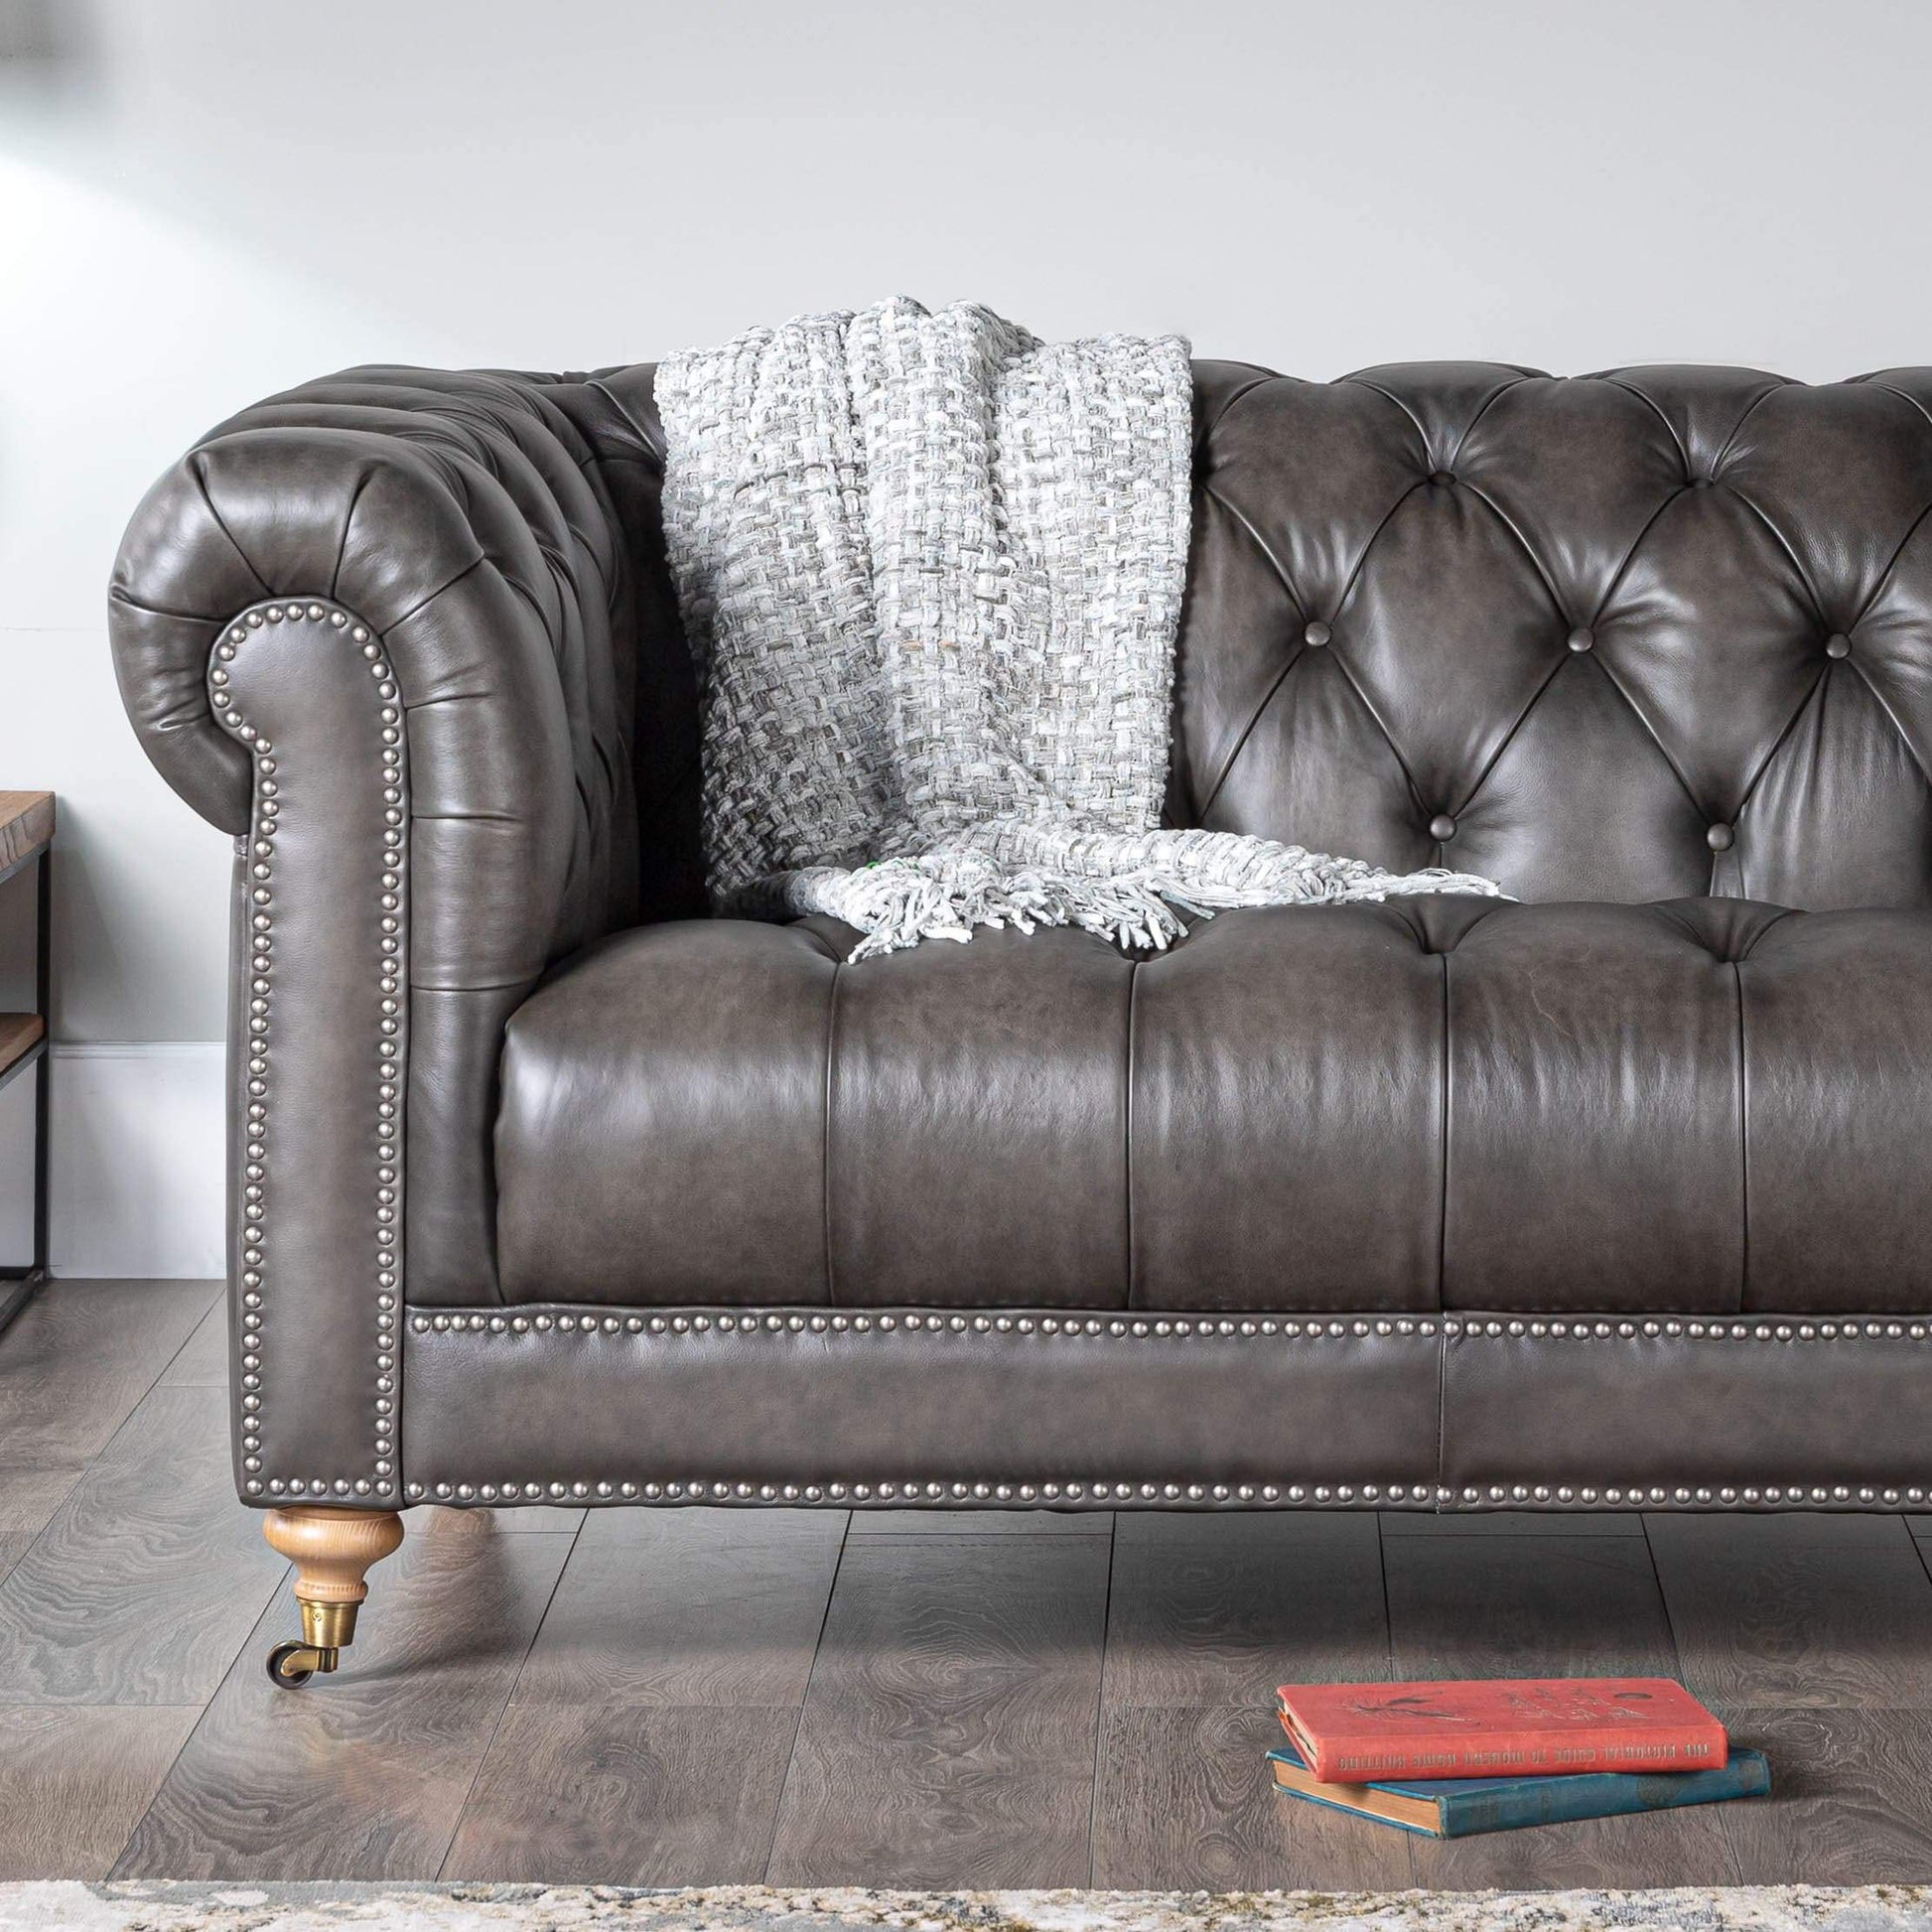 Furniture  -  Piccadilly 2 Seat Leather Sofa  -  50153472